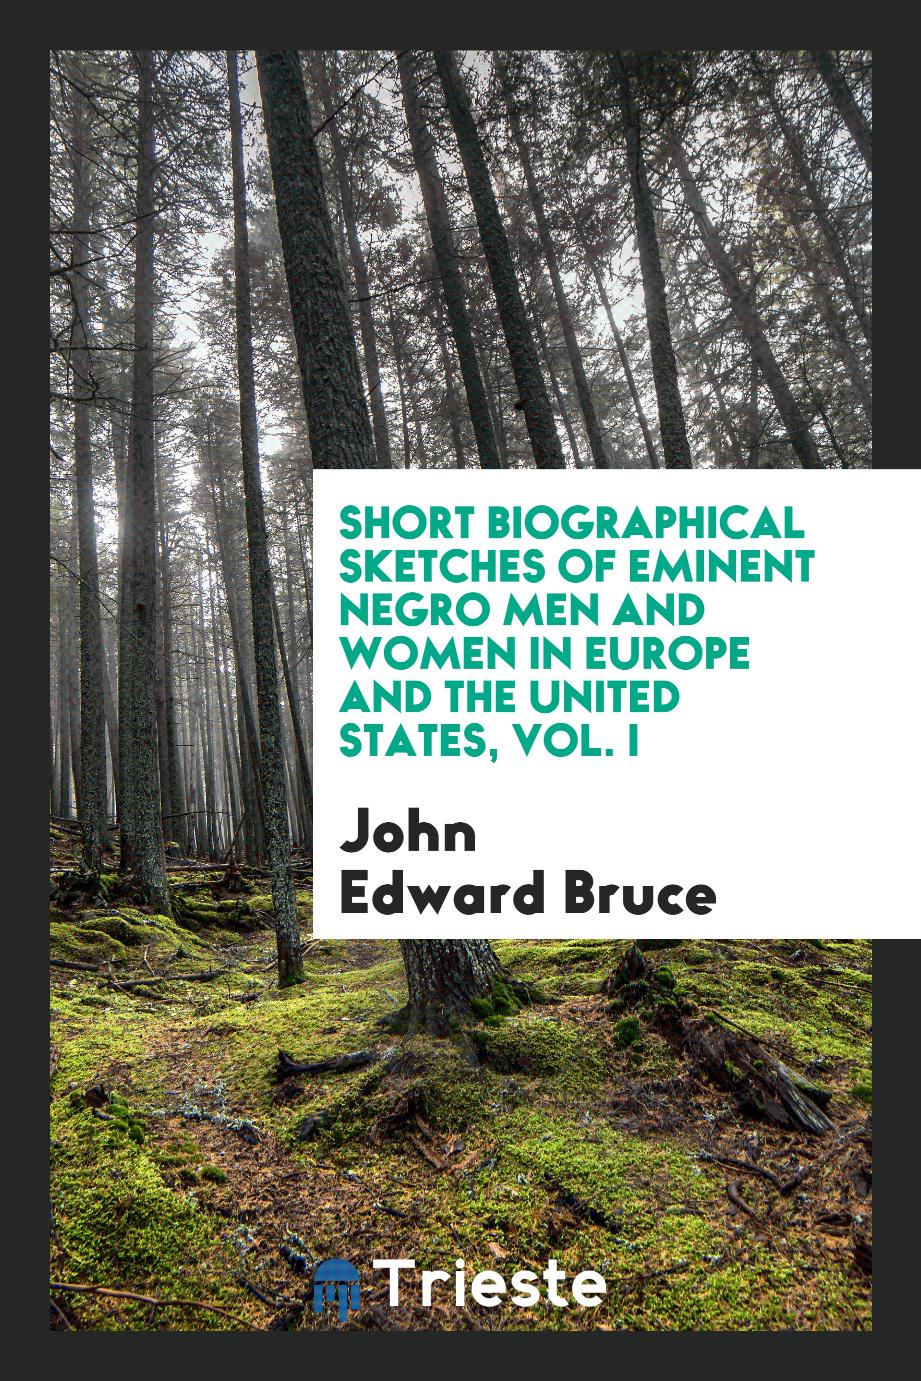 Short Biographical Sketches of Eminent Negro Men and Women in Europe and the United States, Vol. I